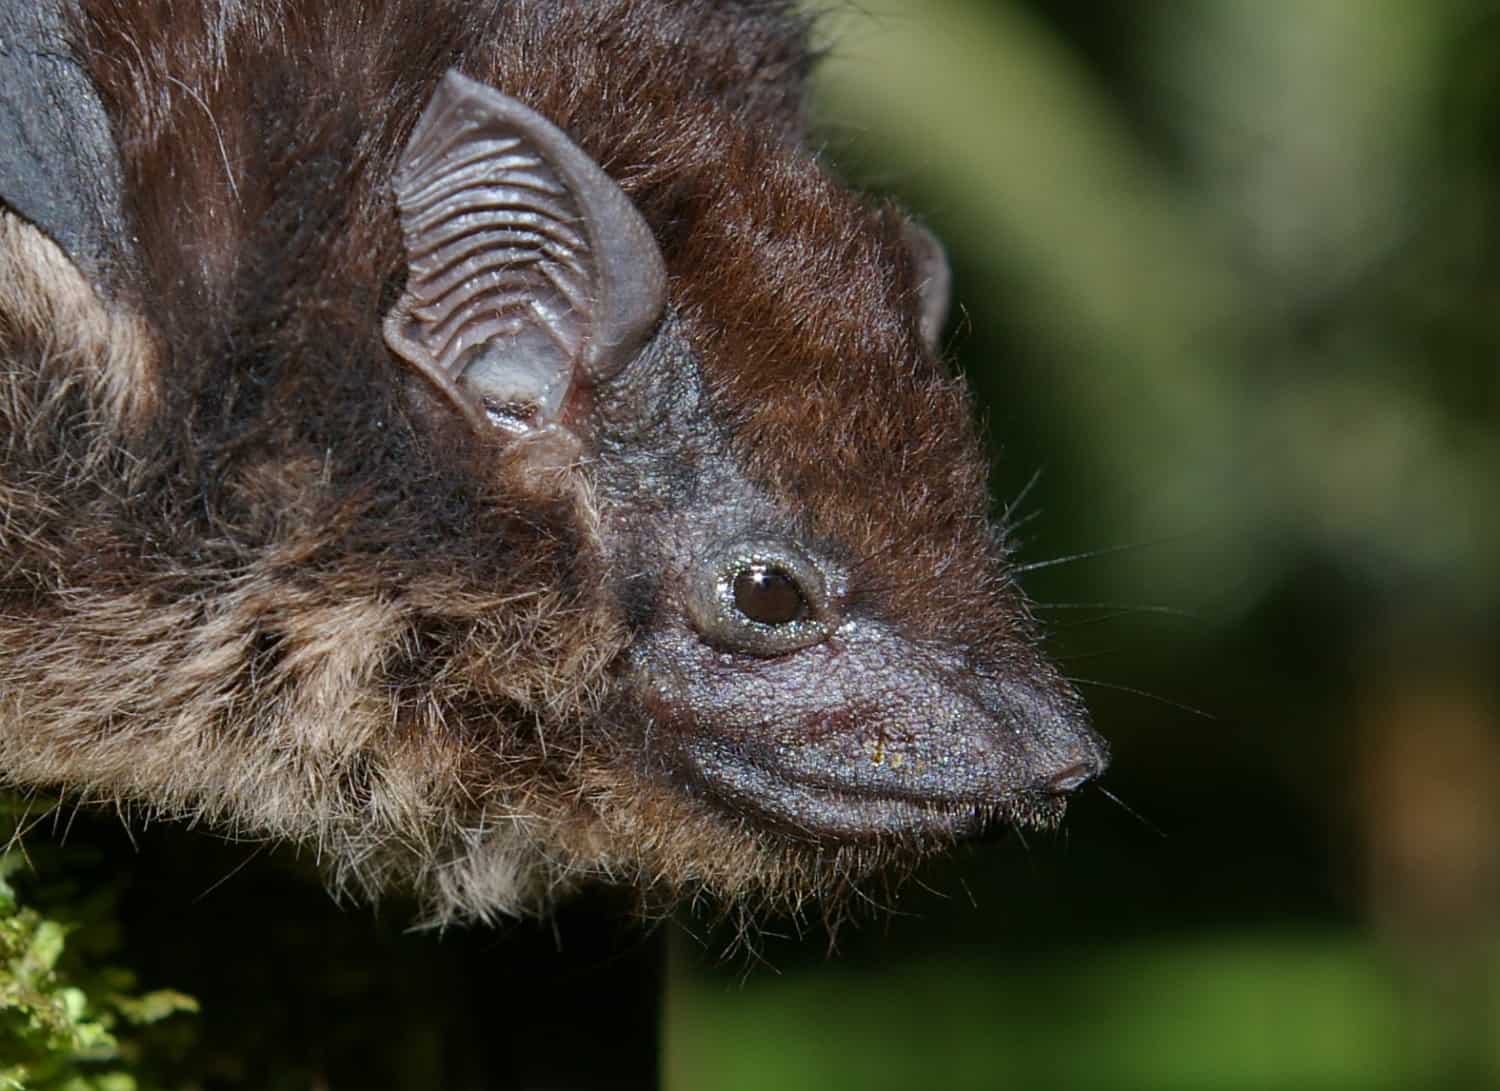 Close-up of a greater sac-winged bat, Saccopteryx bilineata